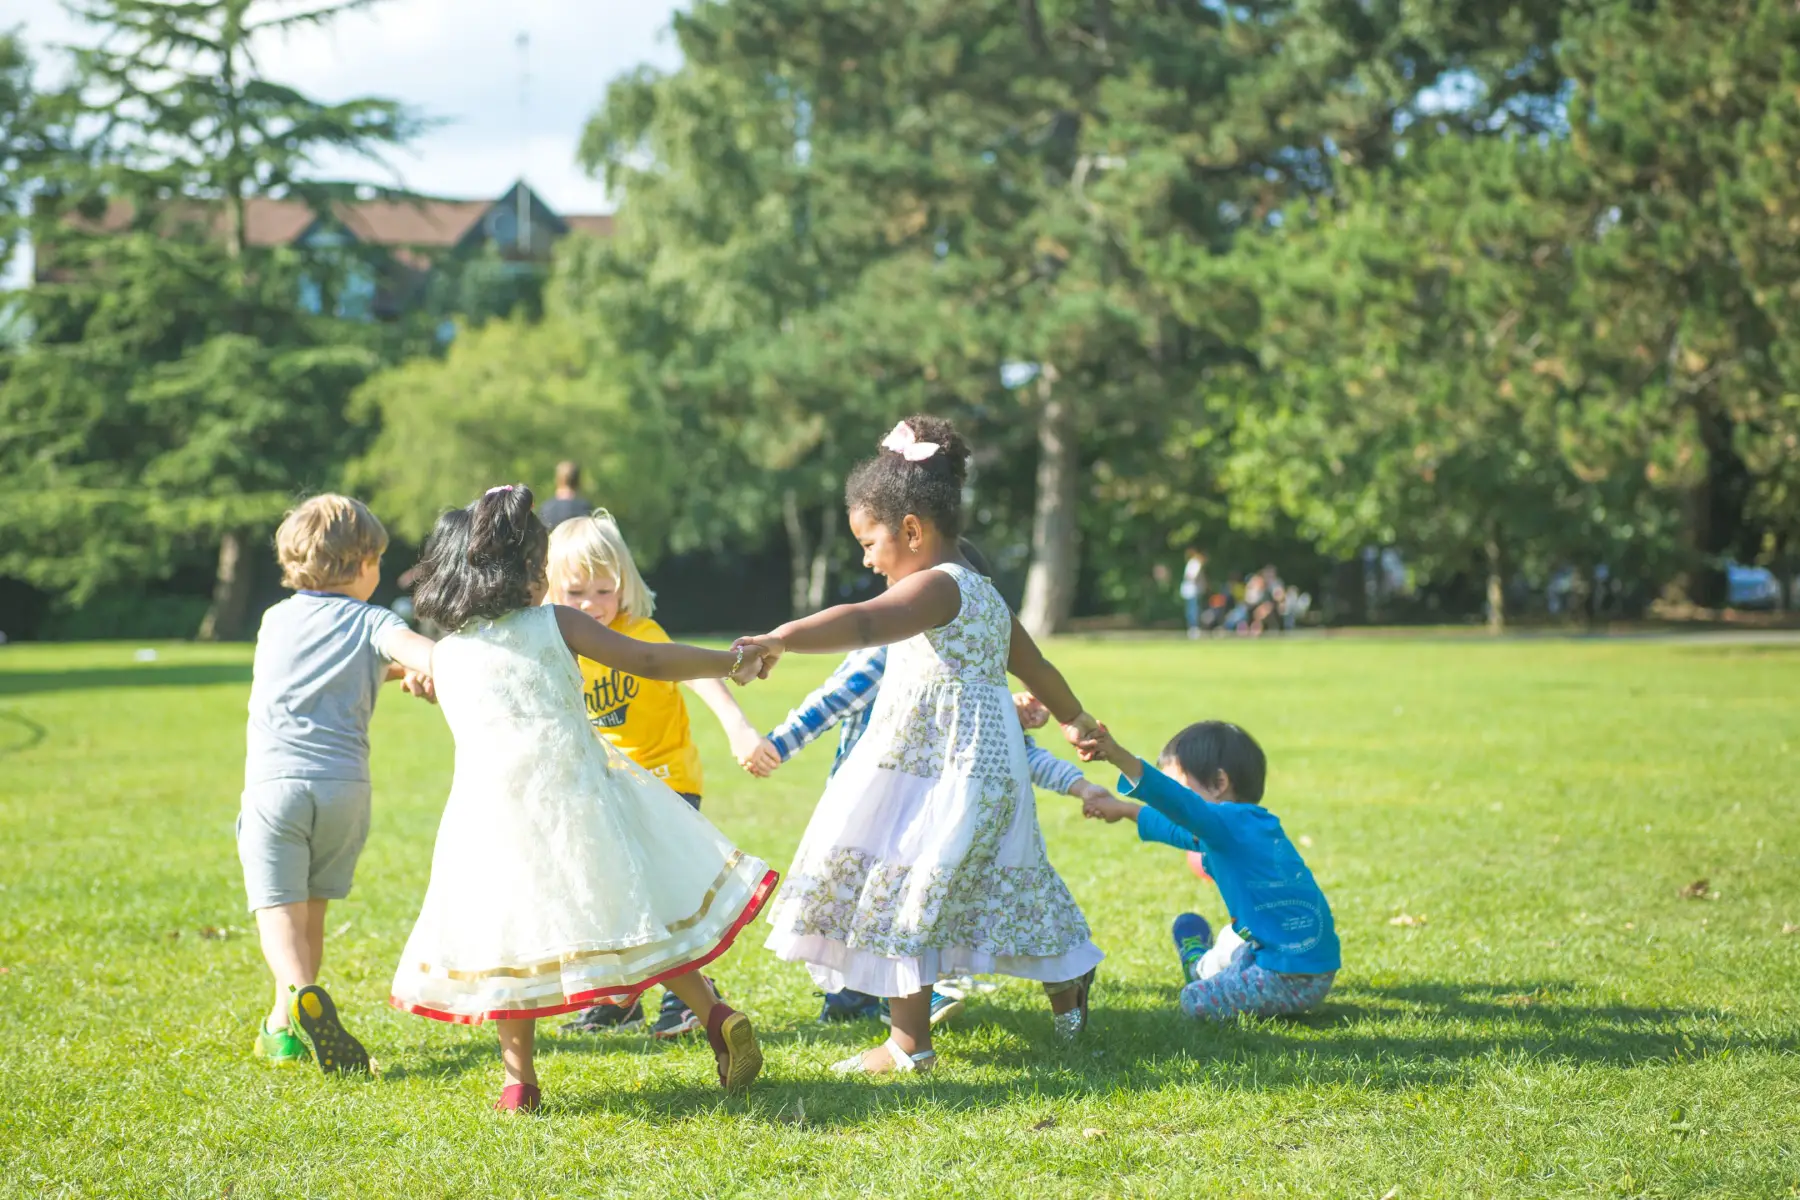 A group of young children holding hands and playing in a circle in a park on a sunny day